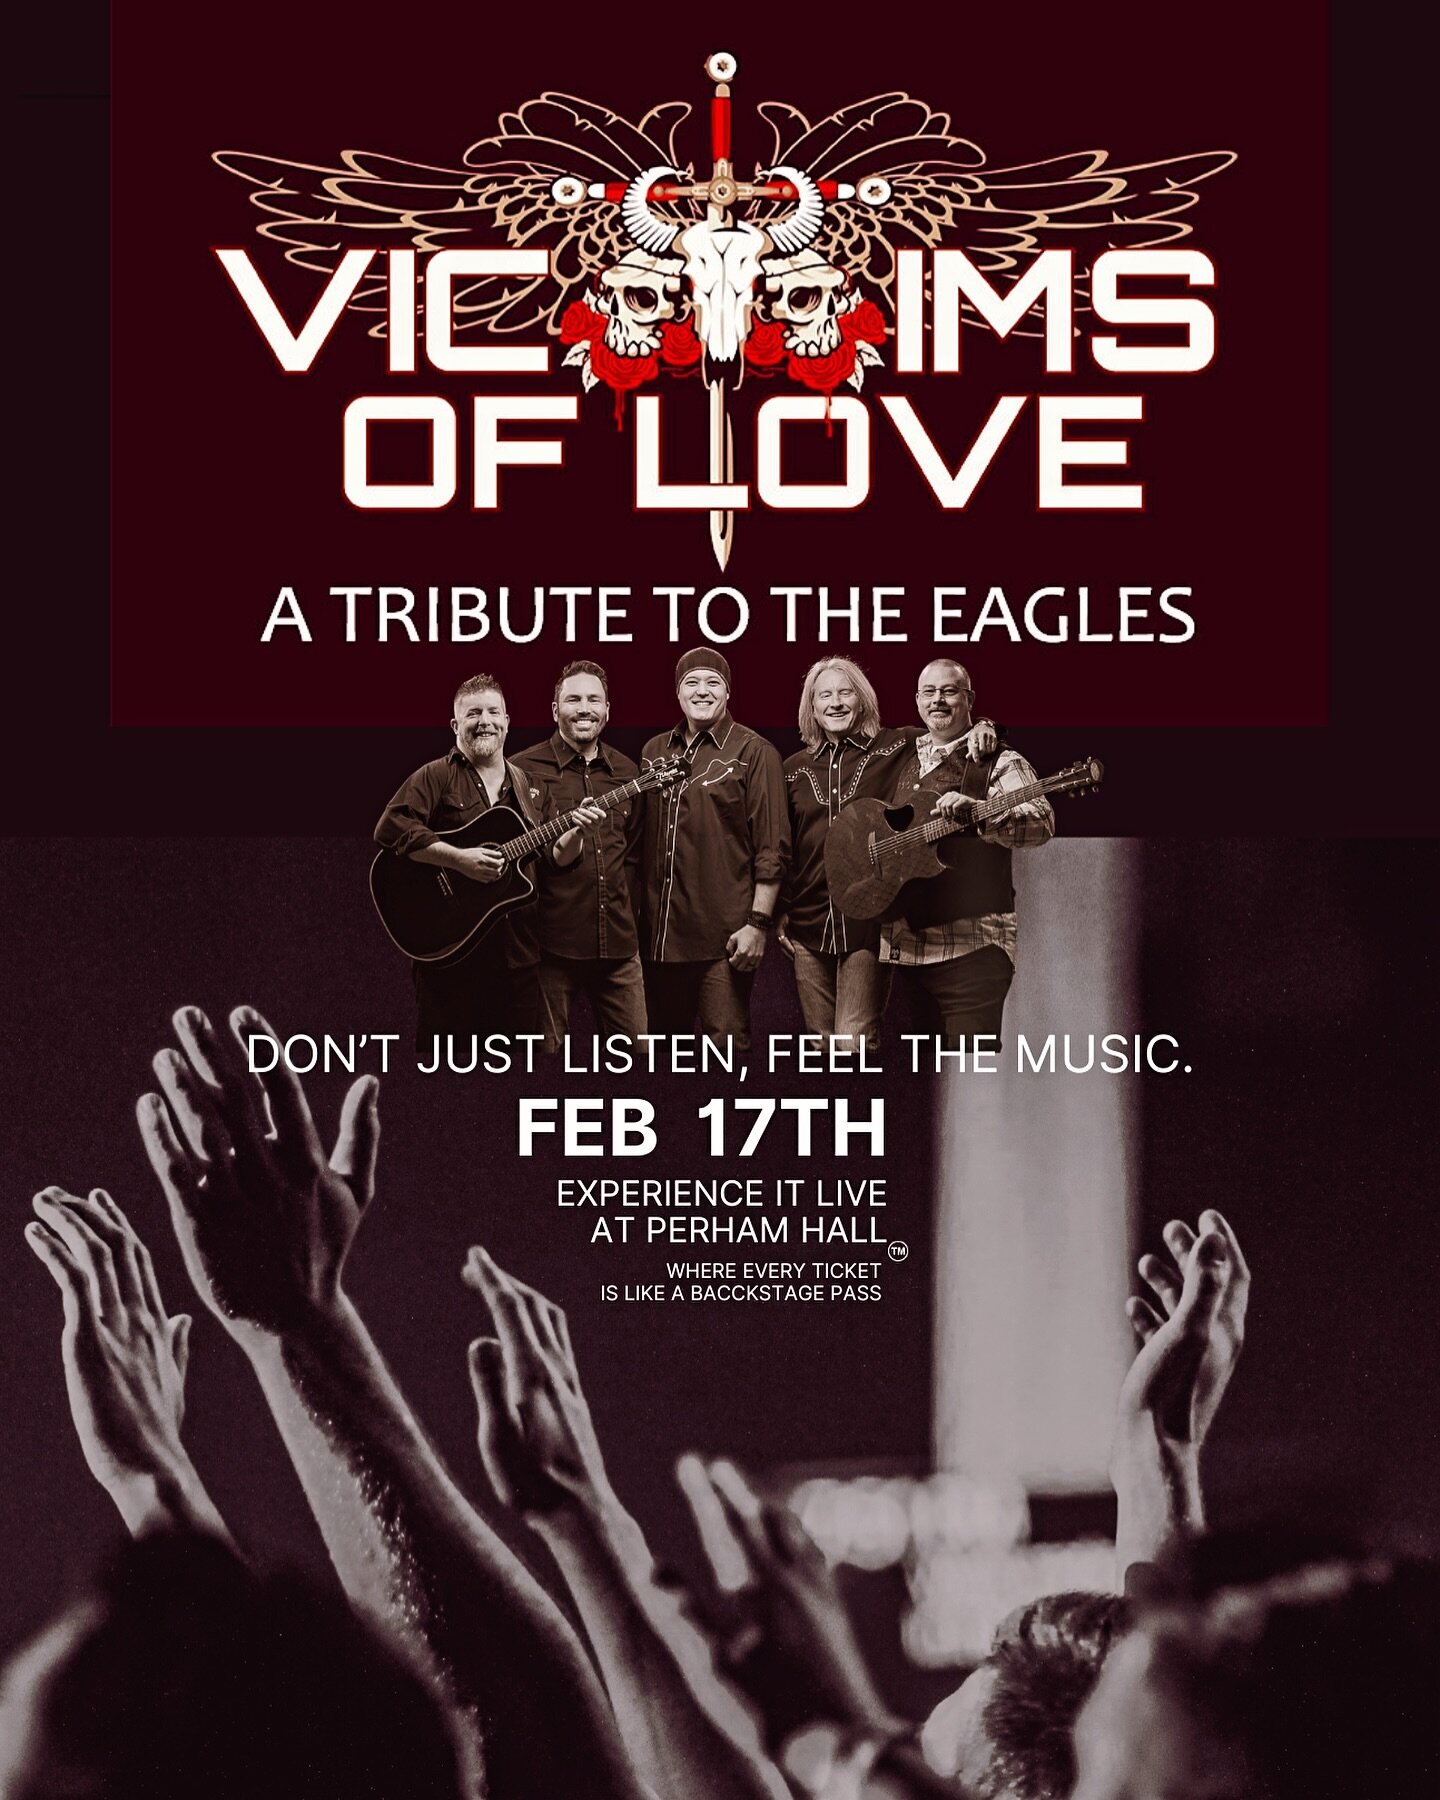 Join us as we pay tribute to one of the greatest bands of all time - The Eagles. Victims of Love will take you on a musical journey, recreating the magic and timeless hits that made The Eagles a household name.  Get ready to sing along to classics li